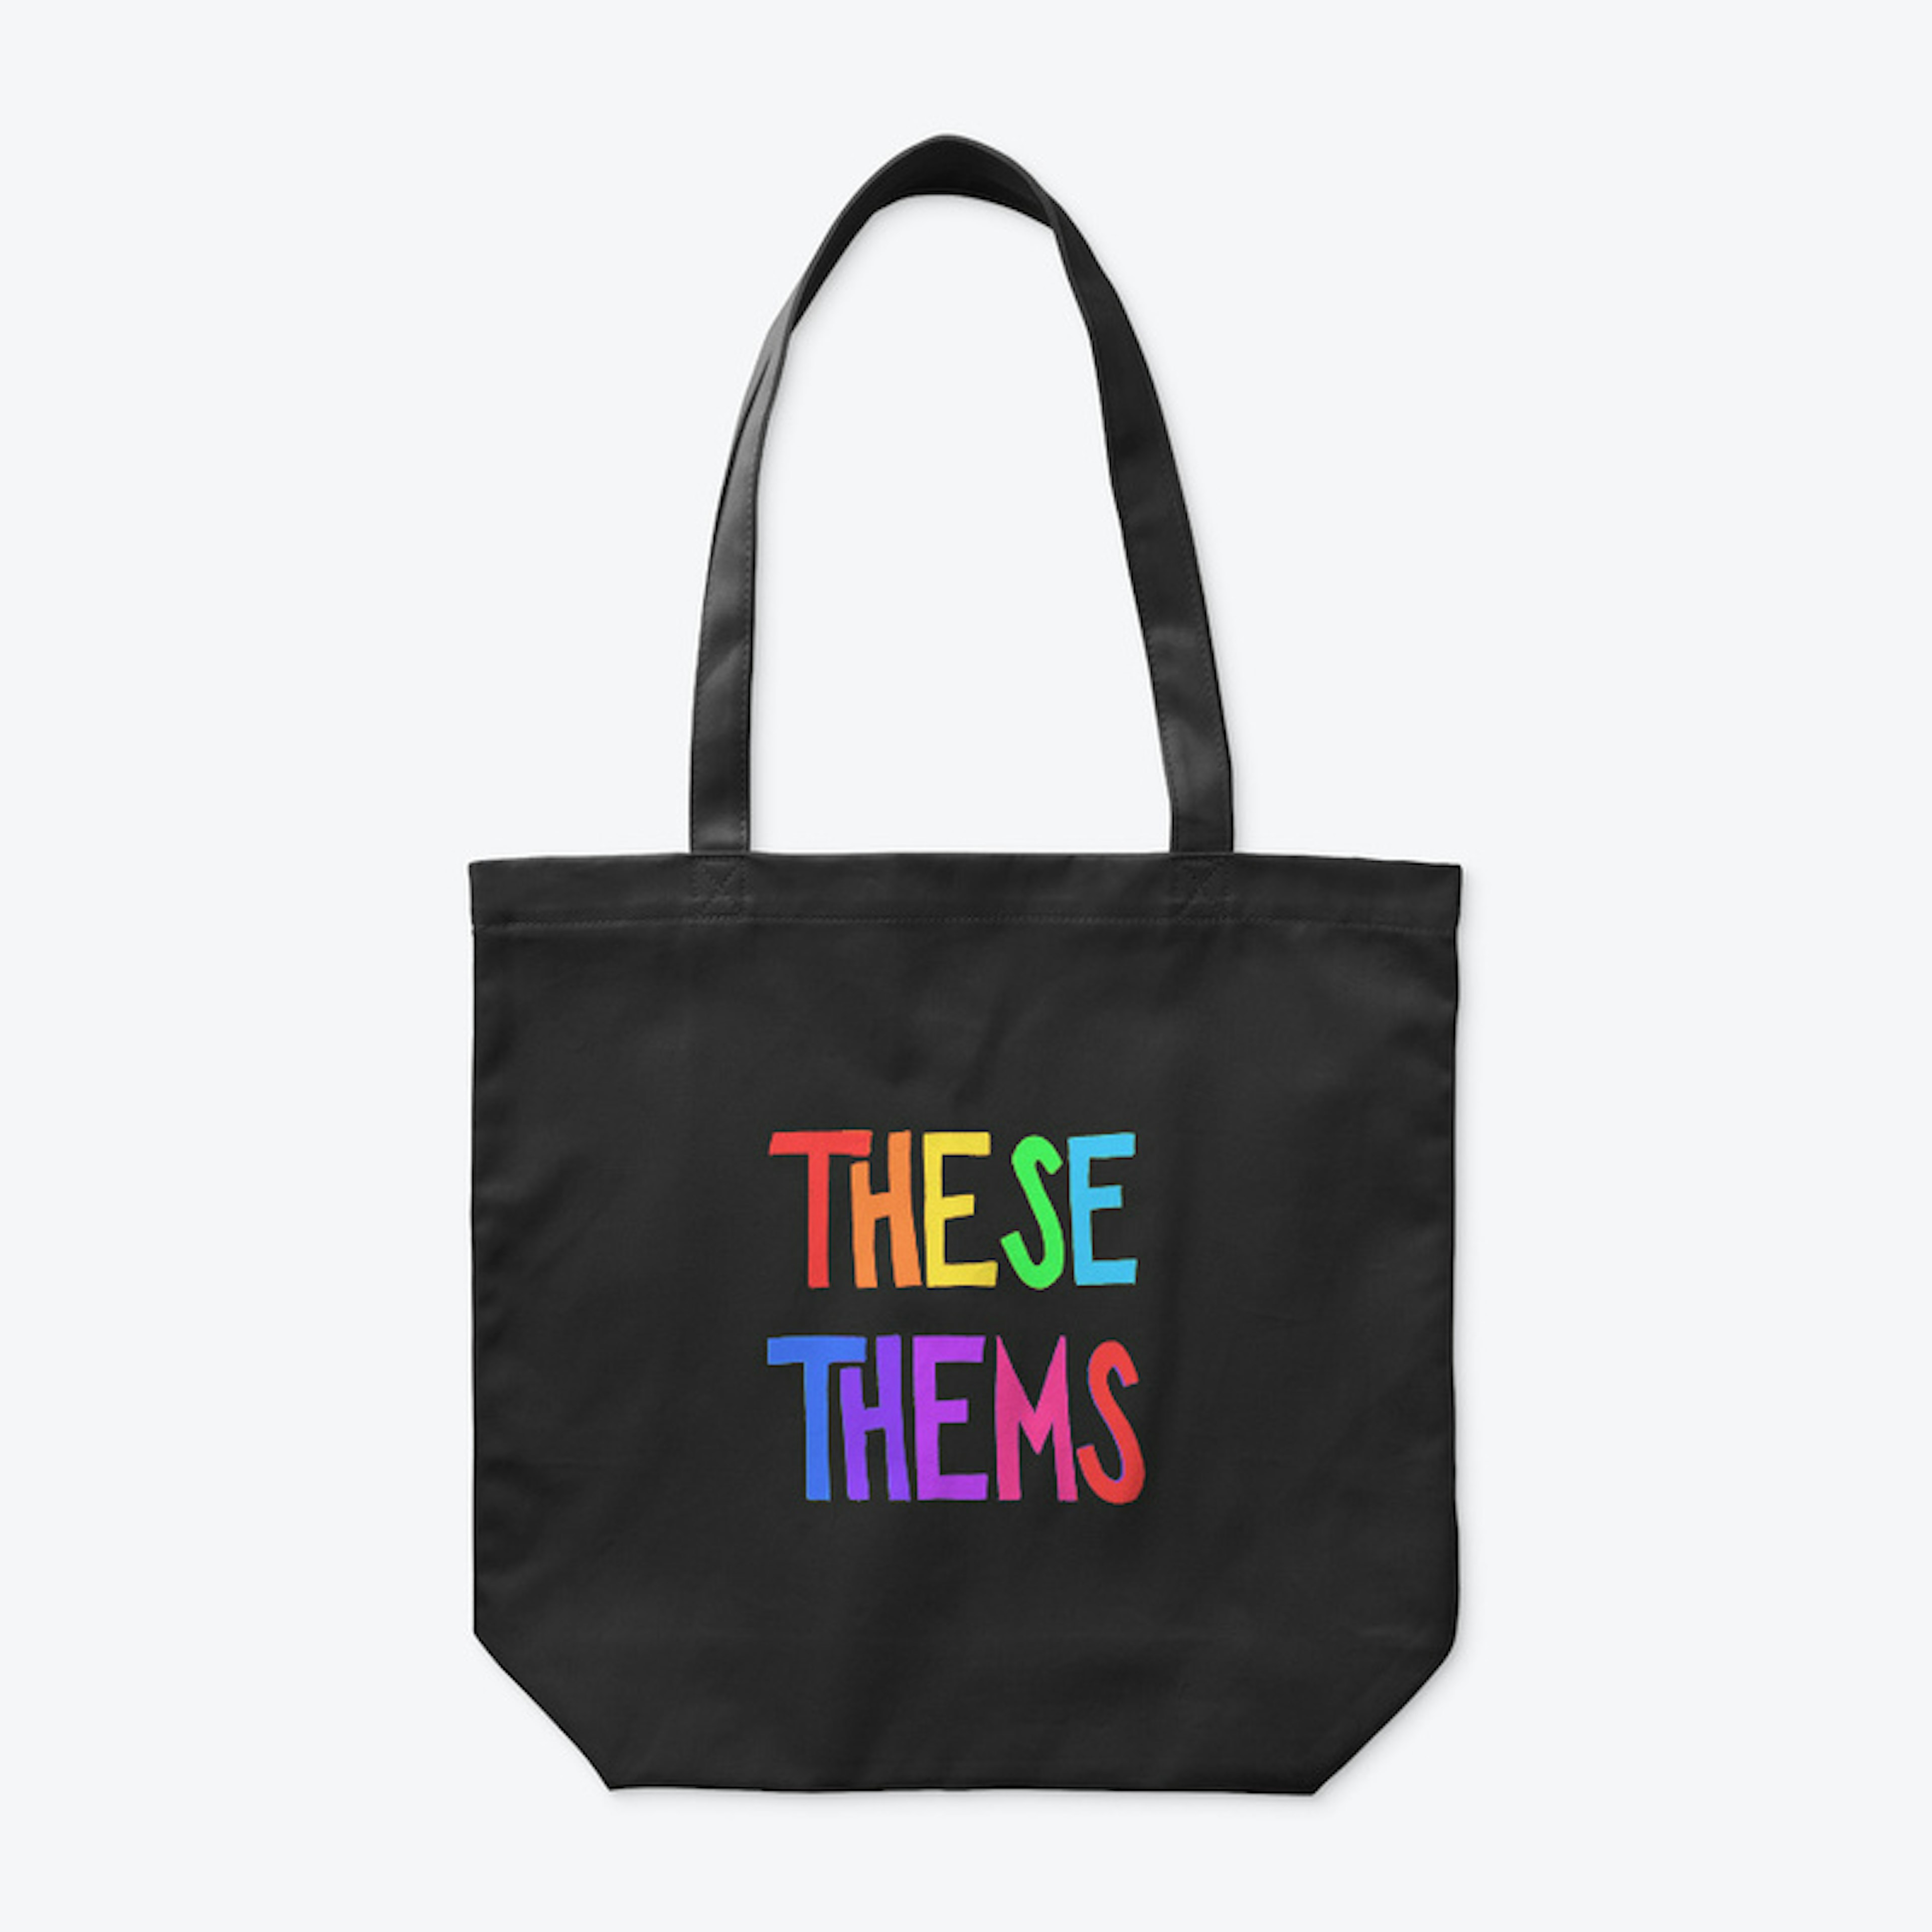 Expensive ass tote with These Thems logo